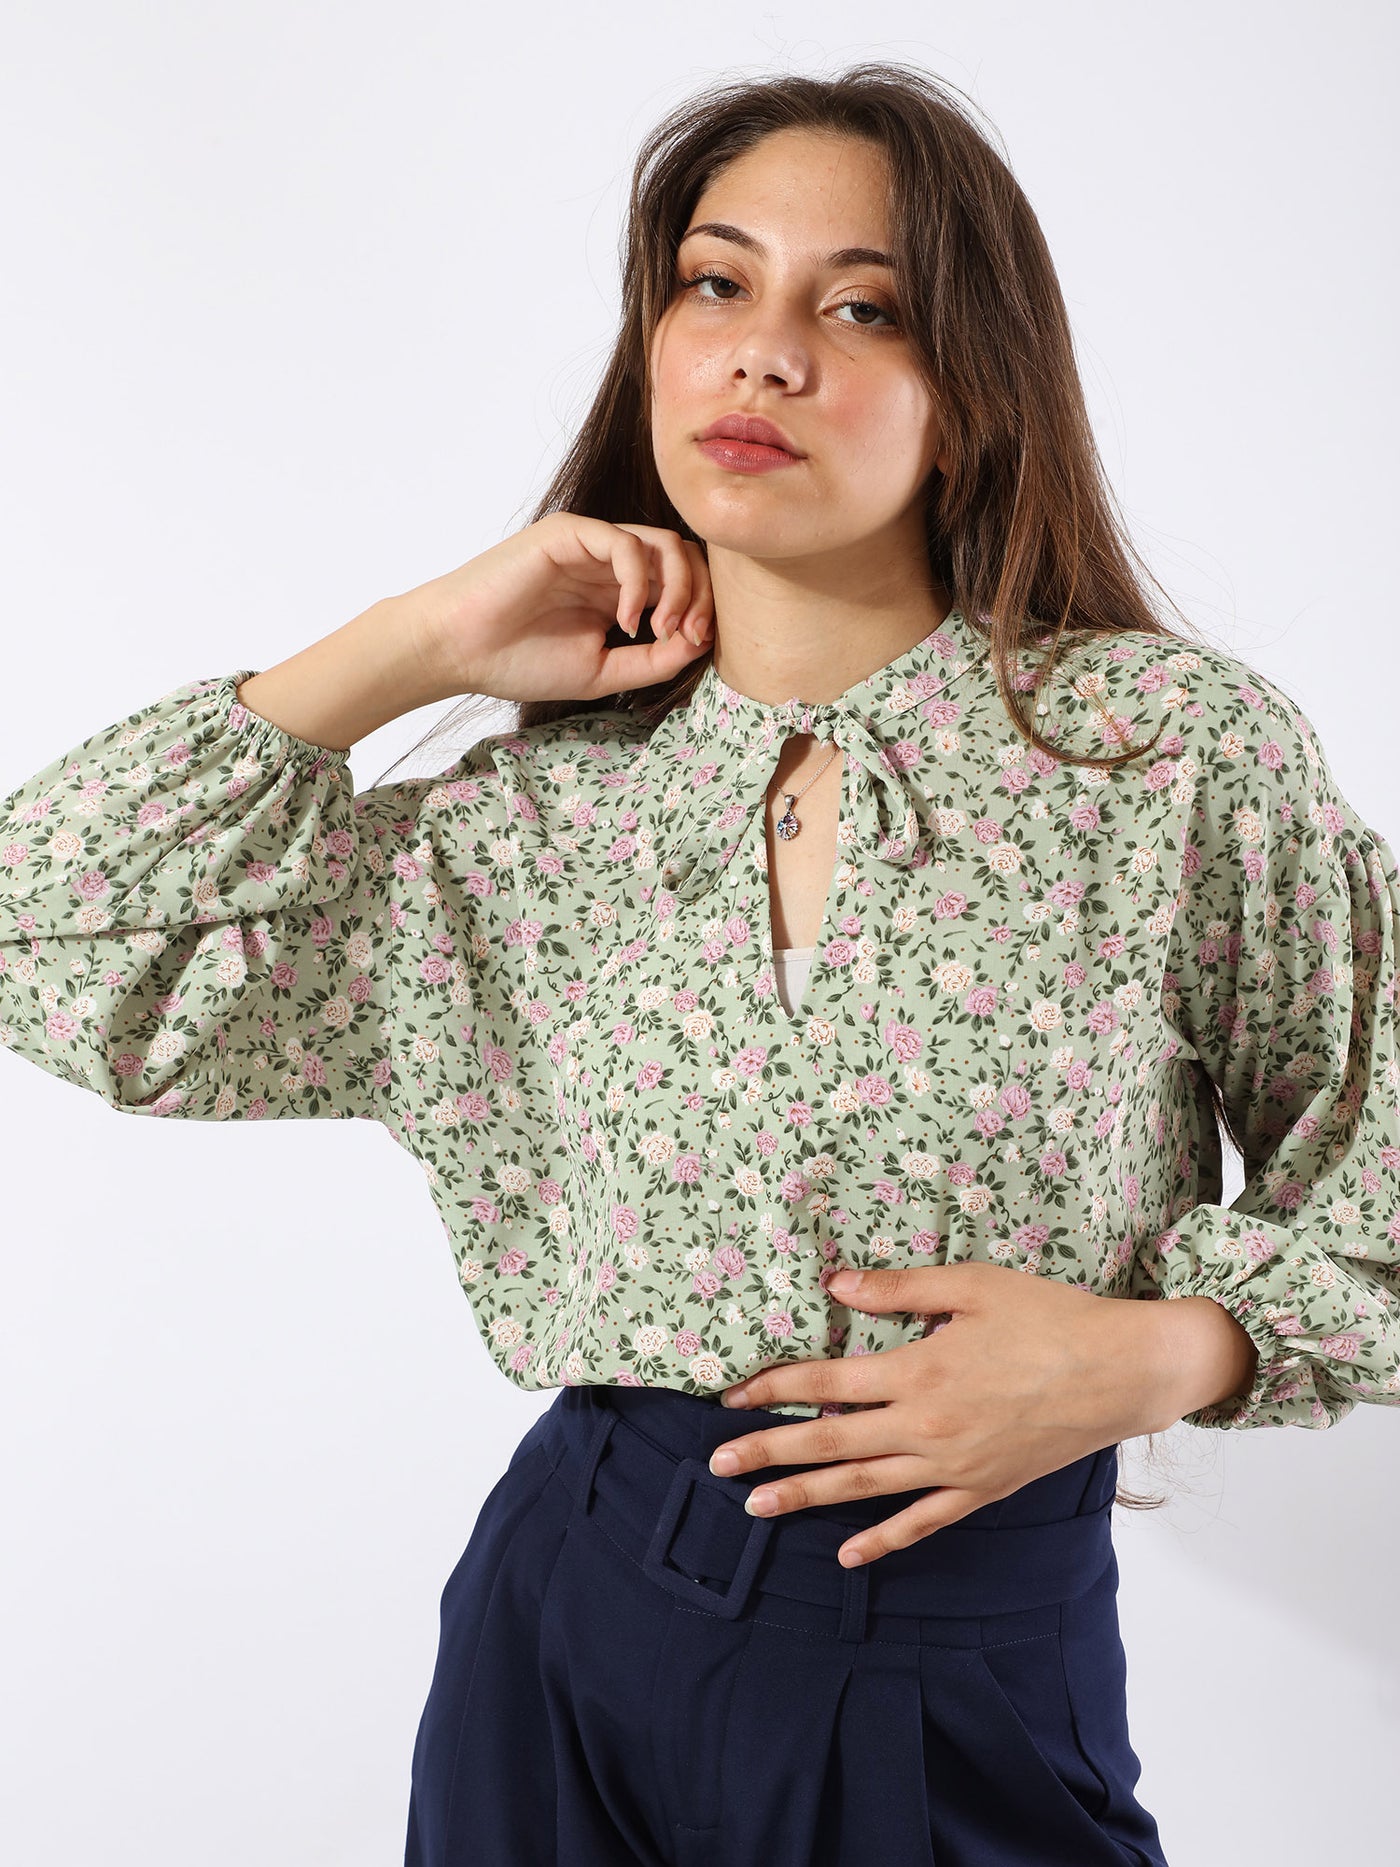 Blouse - Printed - Front Tie